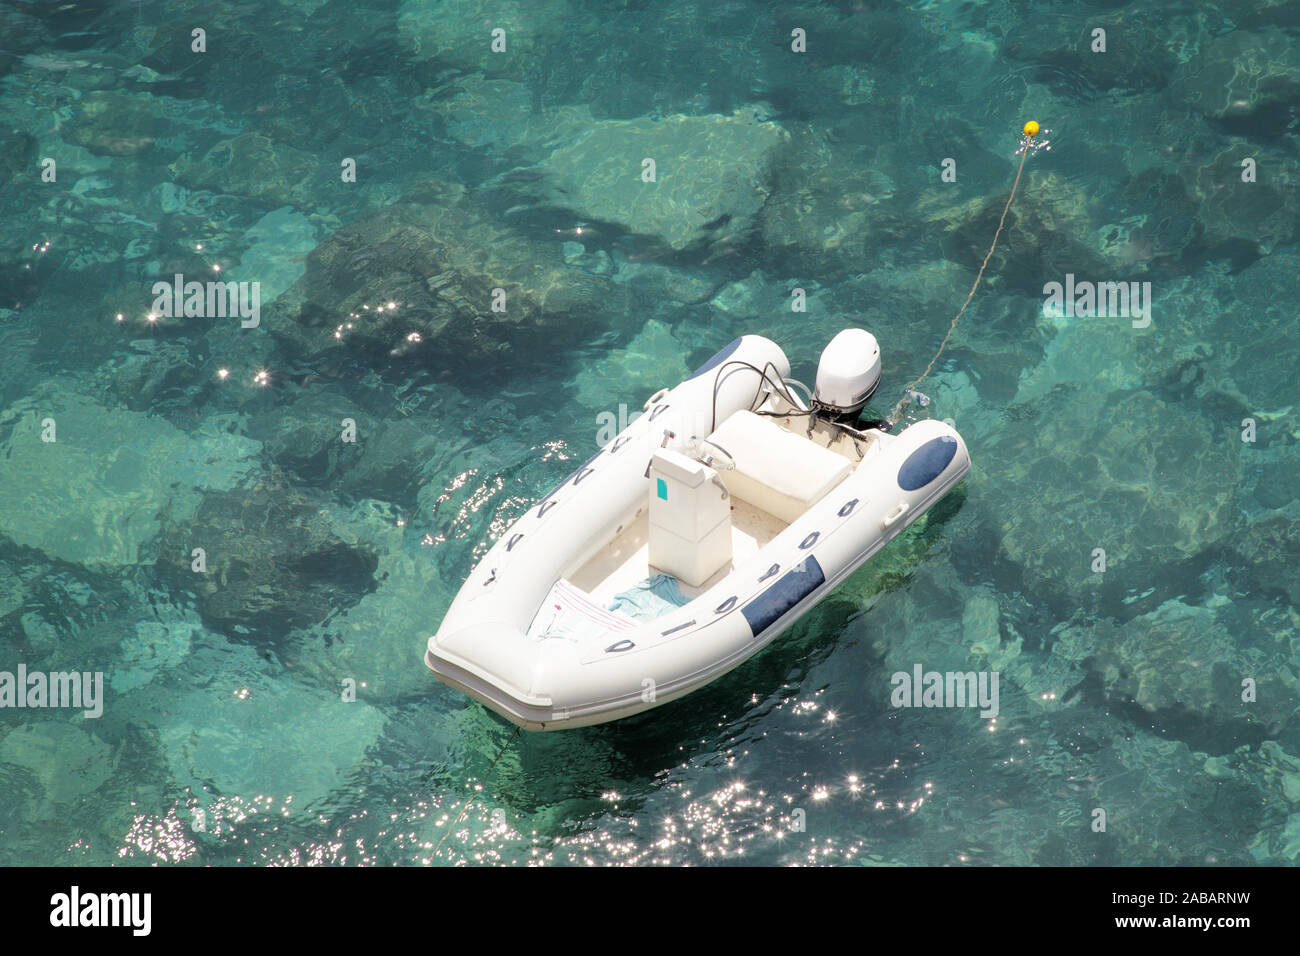 looking down at a small speed boat in the sea Stock Photo